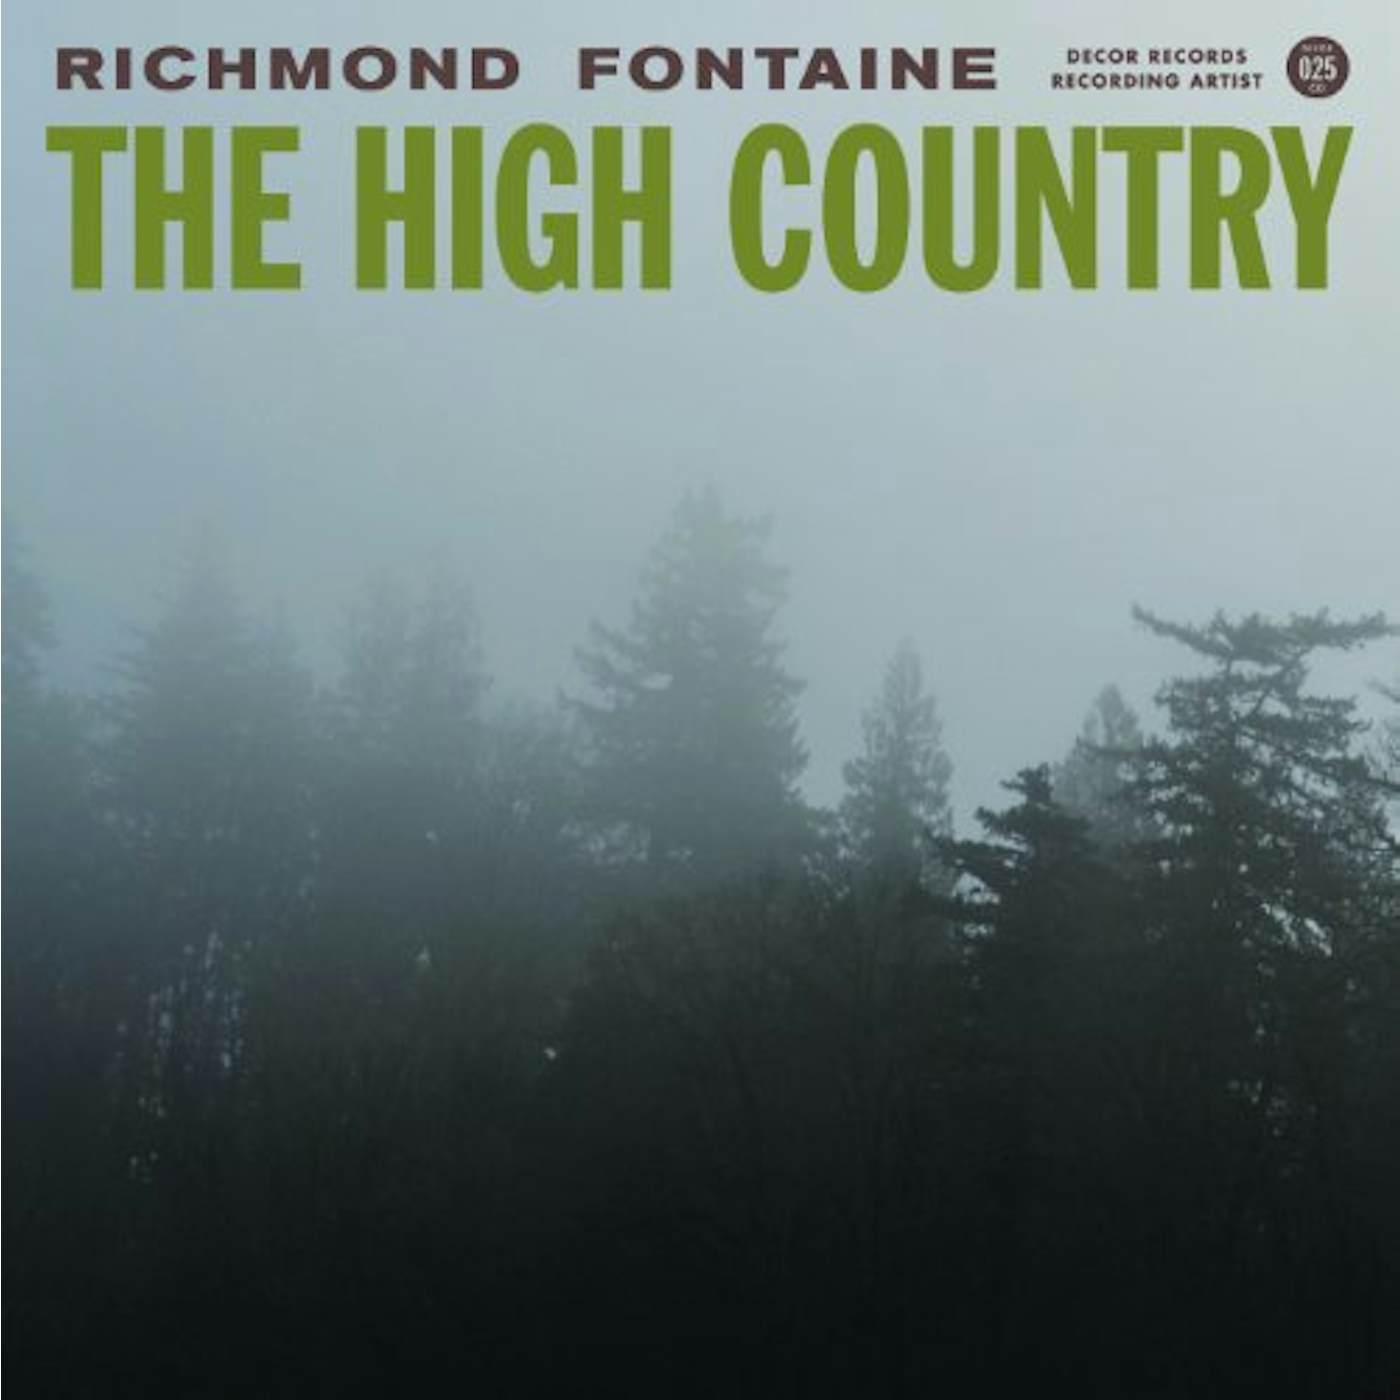 Richmond Fontaine HIGH COUNTRY Vinyl Record - 180 Gram Pressing